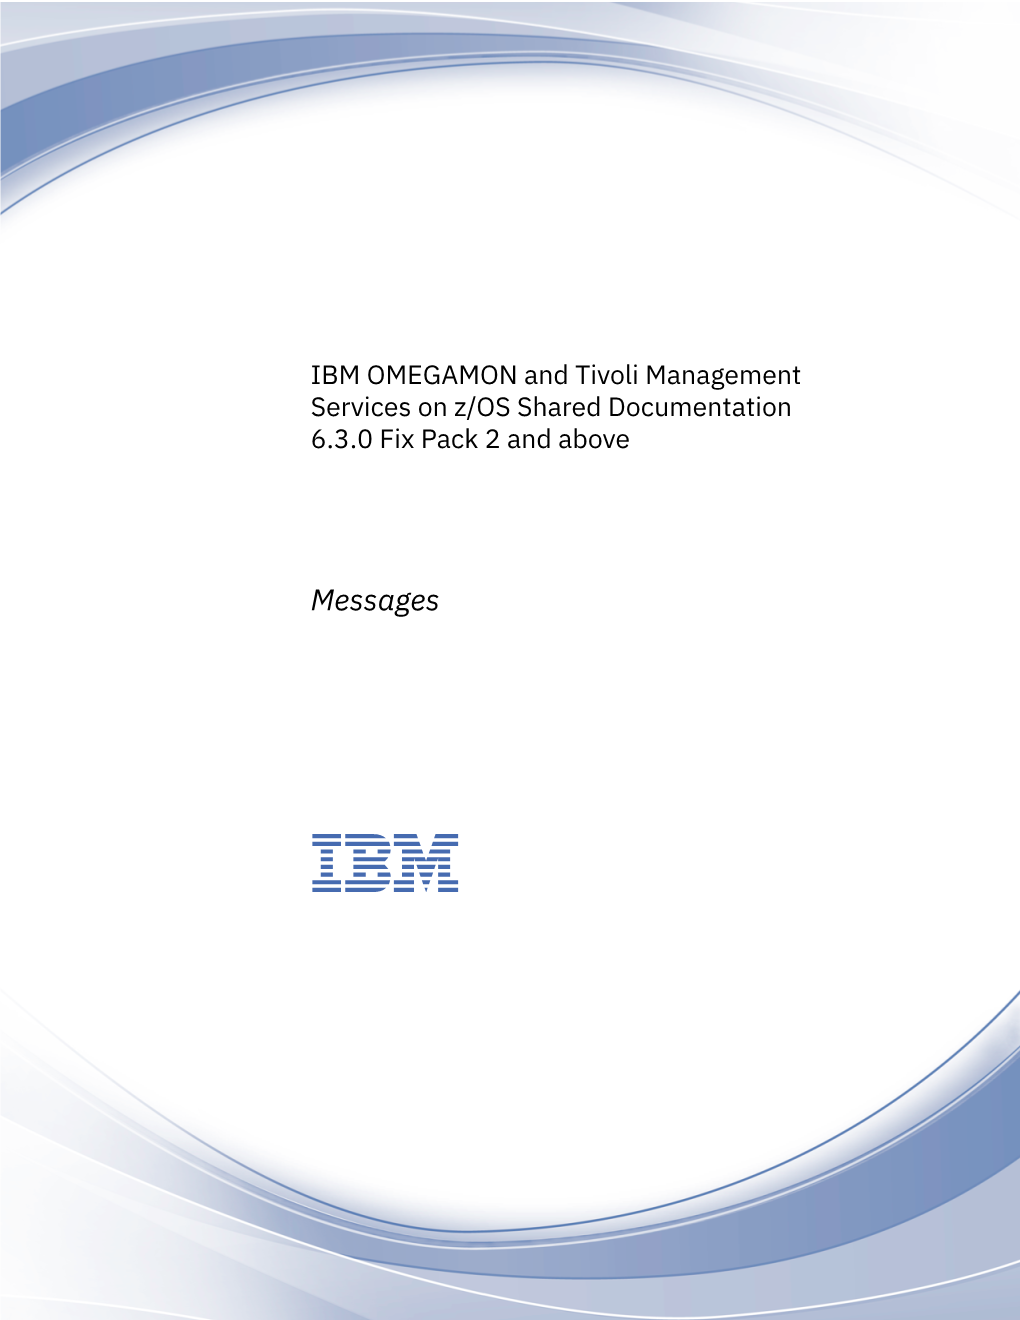 IBM OMEGAMON and Tivoli Management Services on Z/OS Shared Documentation: Messages Table 1